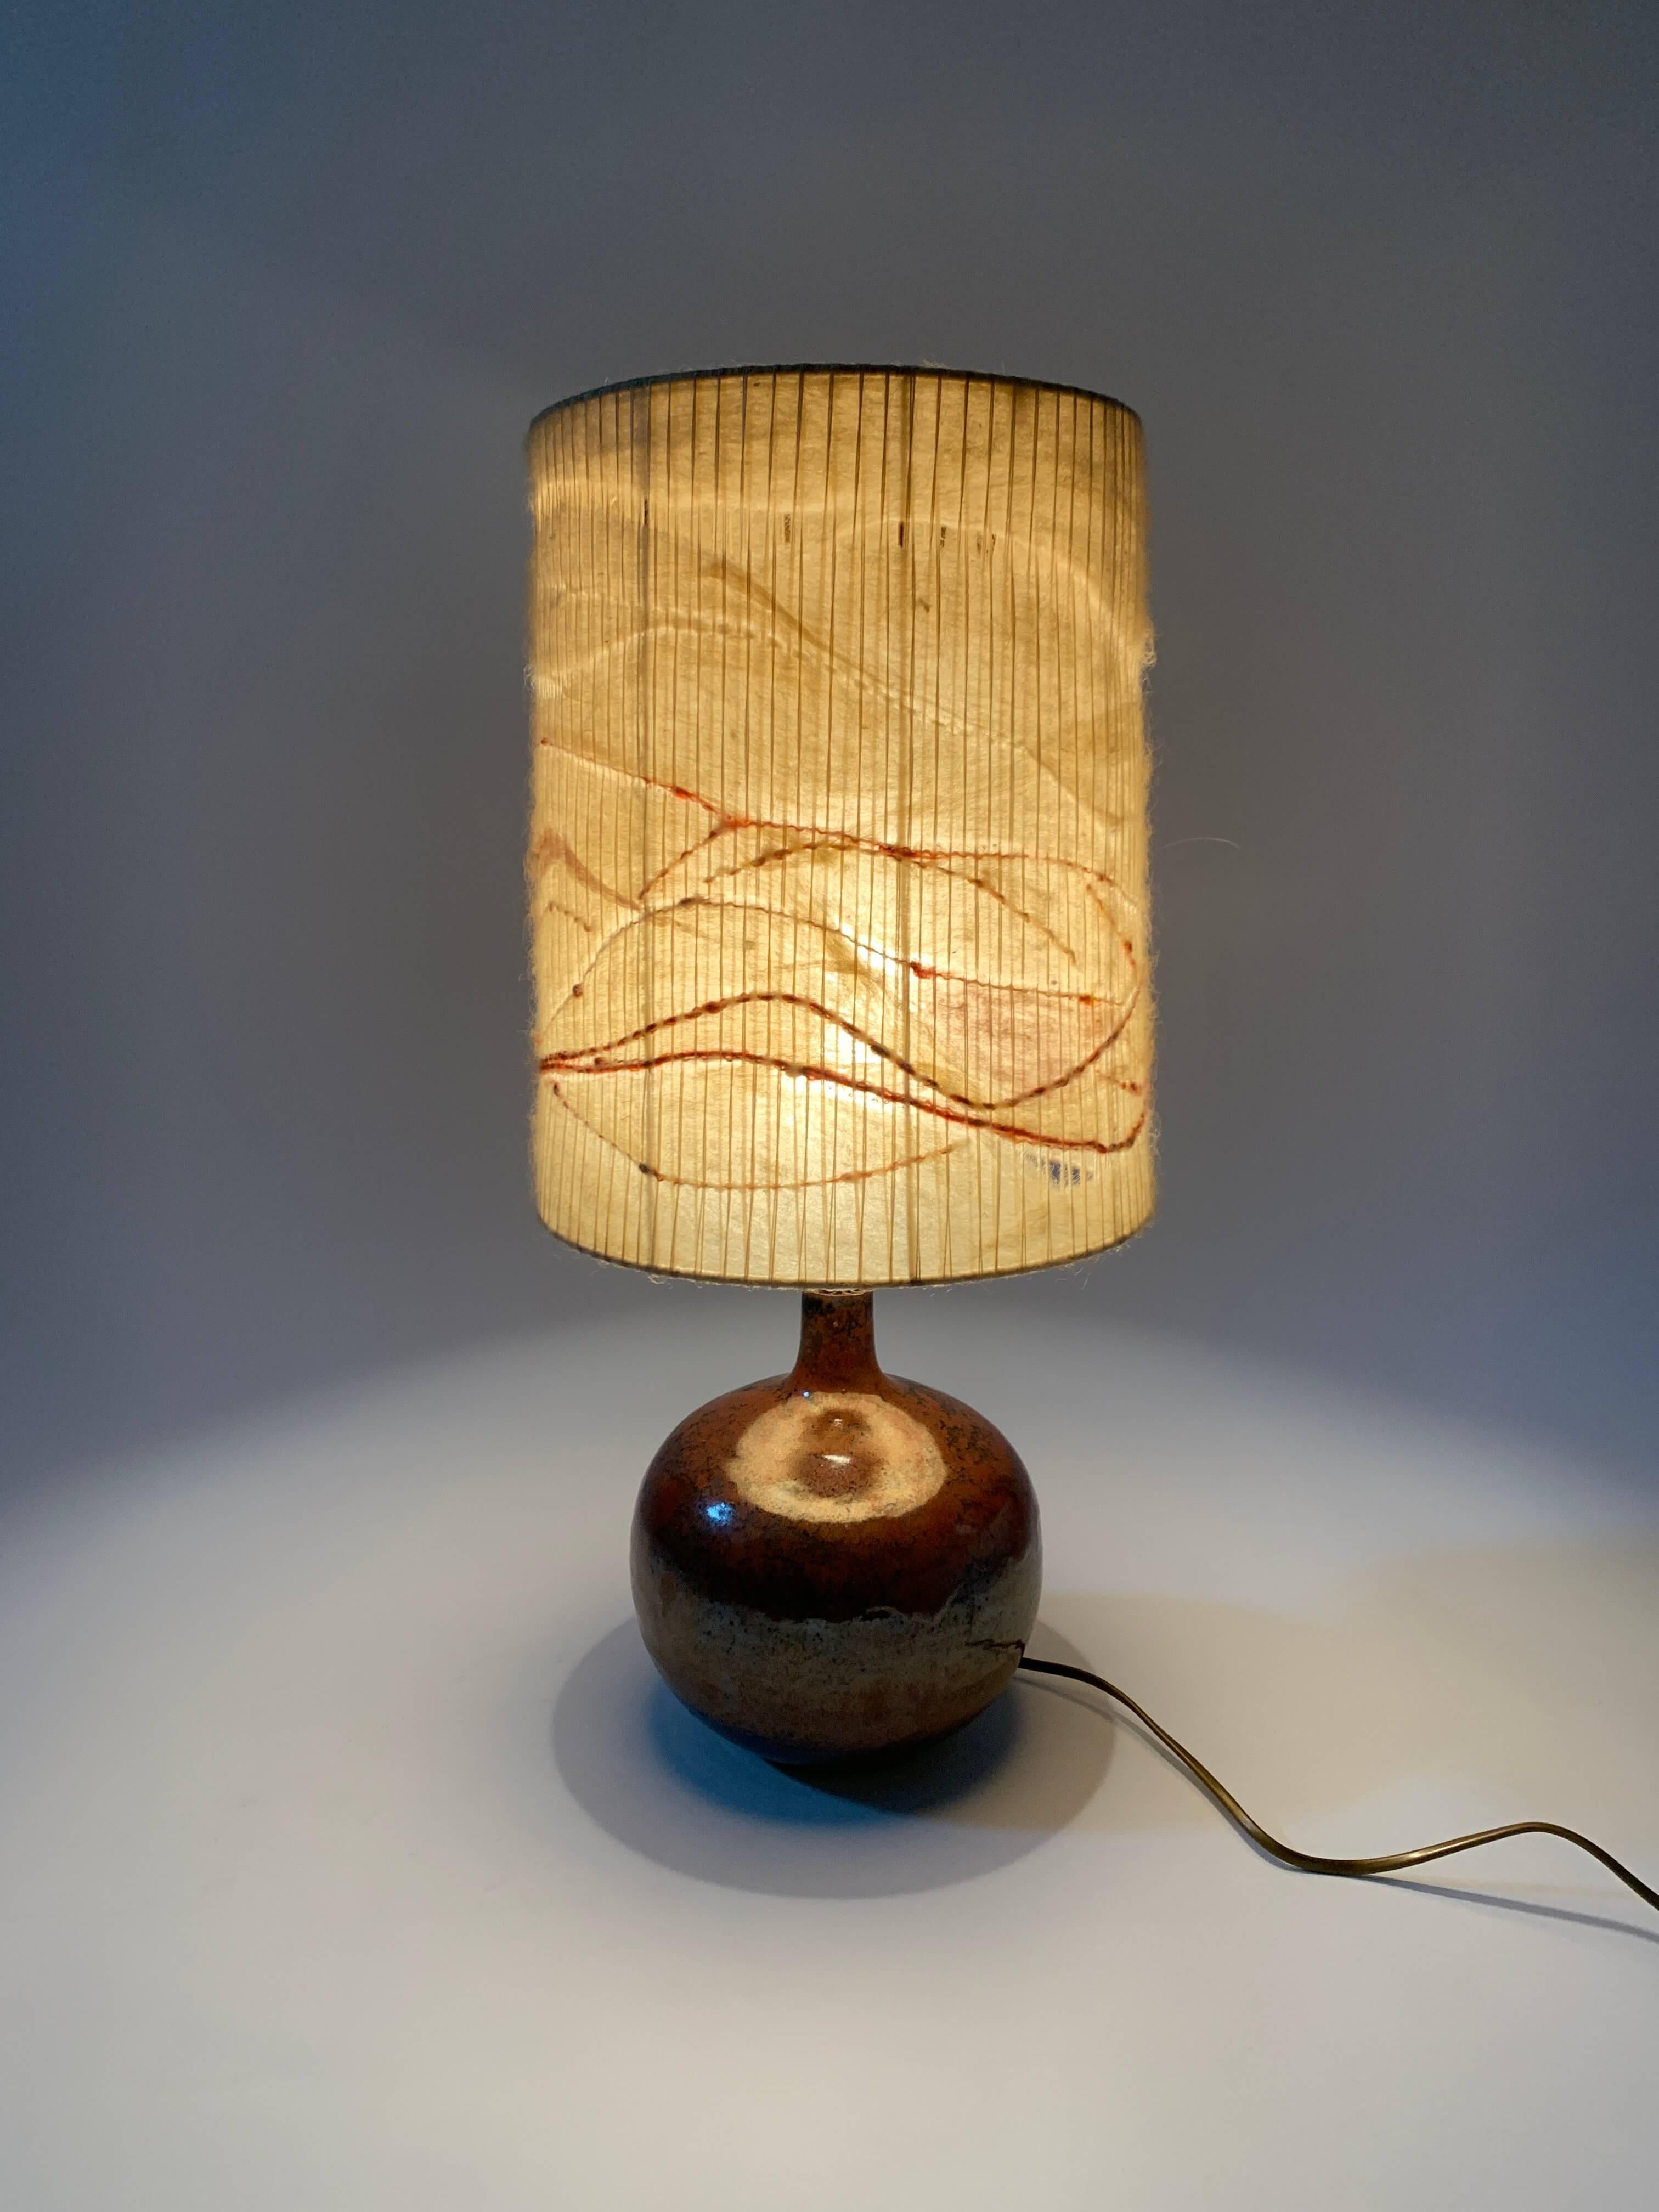 Annie Maume (1945 – )
La Borne School.

Finely enameled stoneware lamp, decorated with a delicate decoration of ash enamels in subtle shades of wine lees, brown and black.
The lamp, accompanied by its original lampshade, is a rare piece.

Signed,